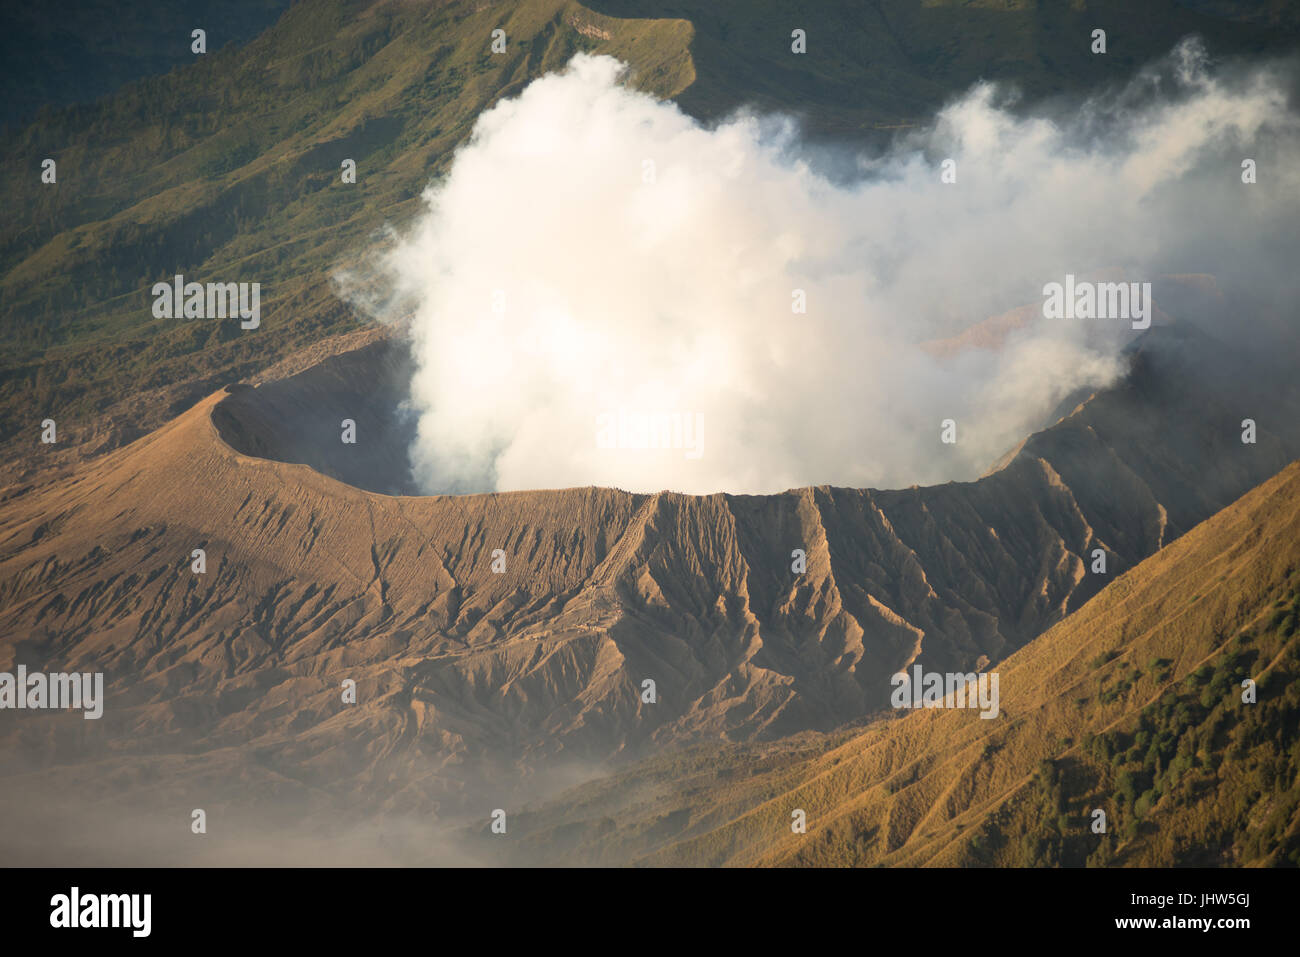 Scenic view of Mount Bromo active volcano at sunrise in East Java Indonesia. Stock Photo